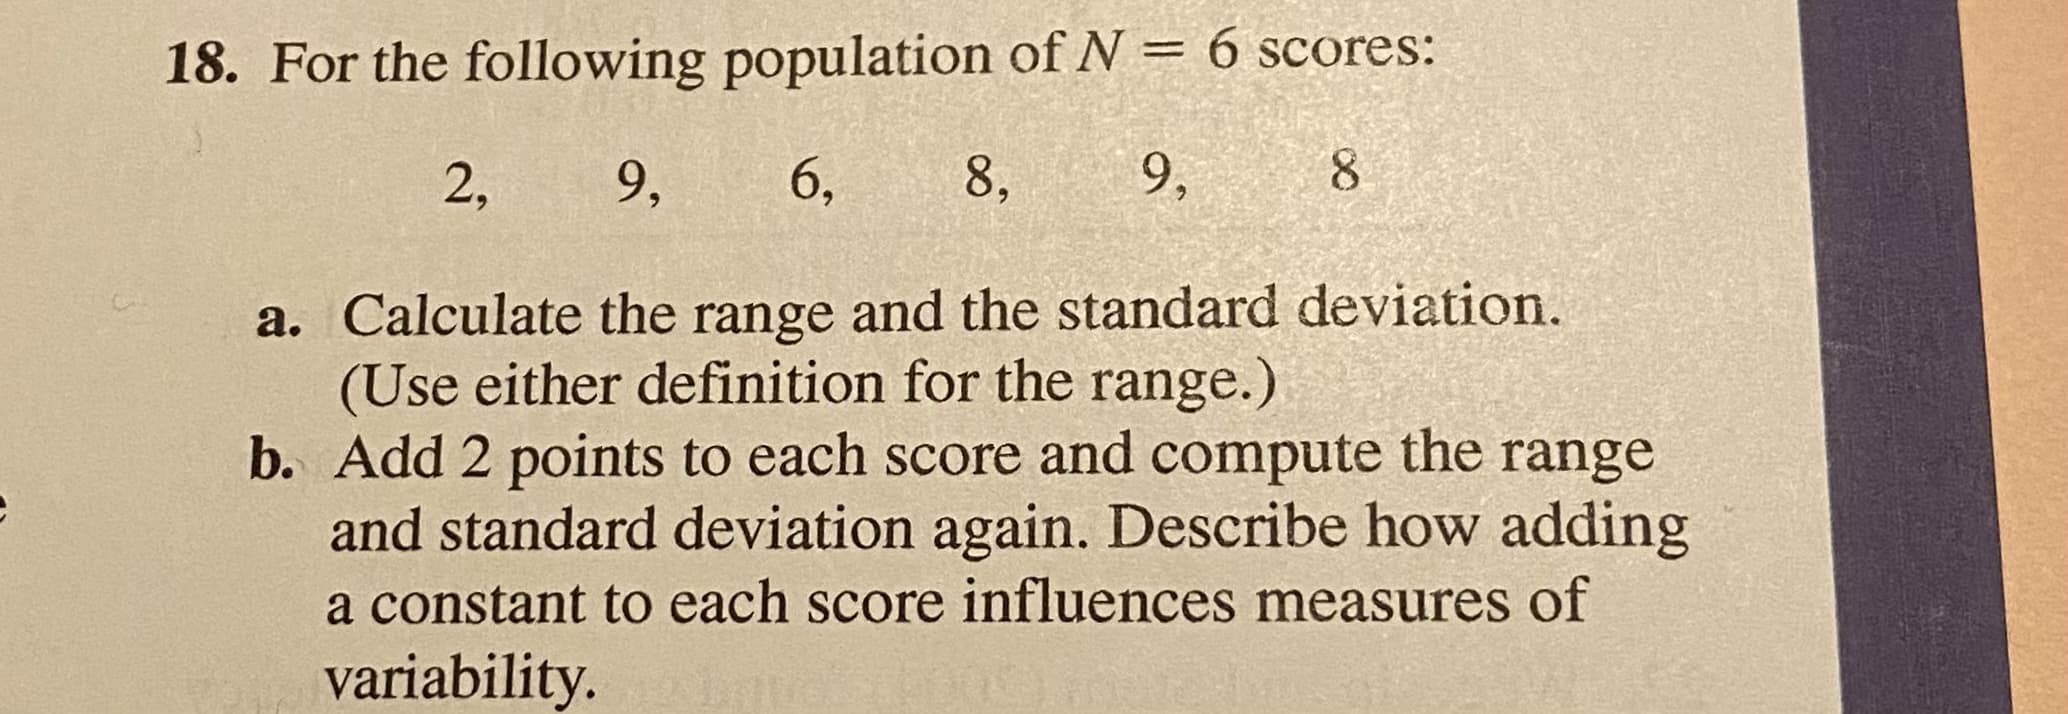 a. Calculate the range and the standard deviation.
(Use either definition for the range.)
b. Add 2 points to each score and compute the range
and standard deviation again. Describe how adding
a constant to each score influences measures of
variability.
